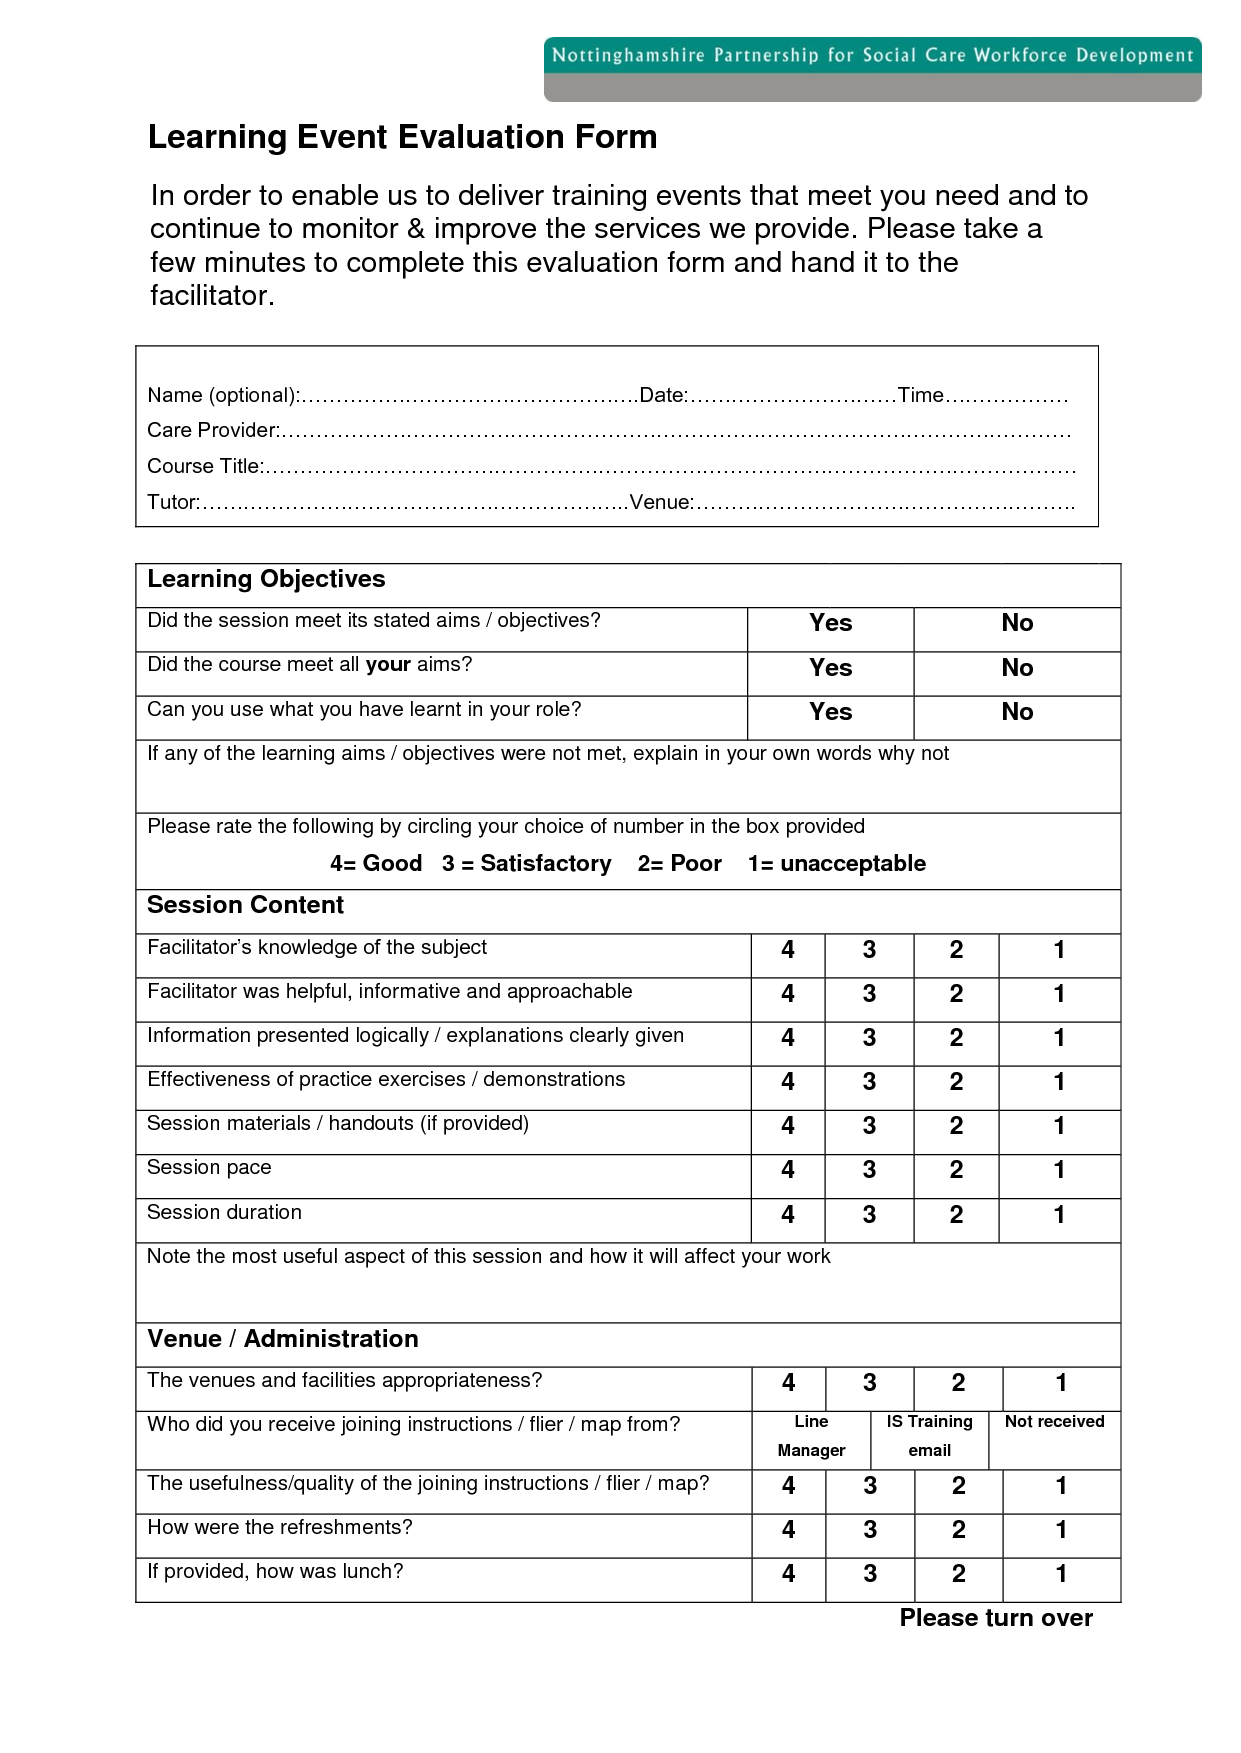 4 Feedback Form Template Outline Templates Trainer Evaluation Training Feedback Template Course Evaluation Training Evaluation Form Evaluation Form